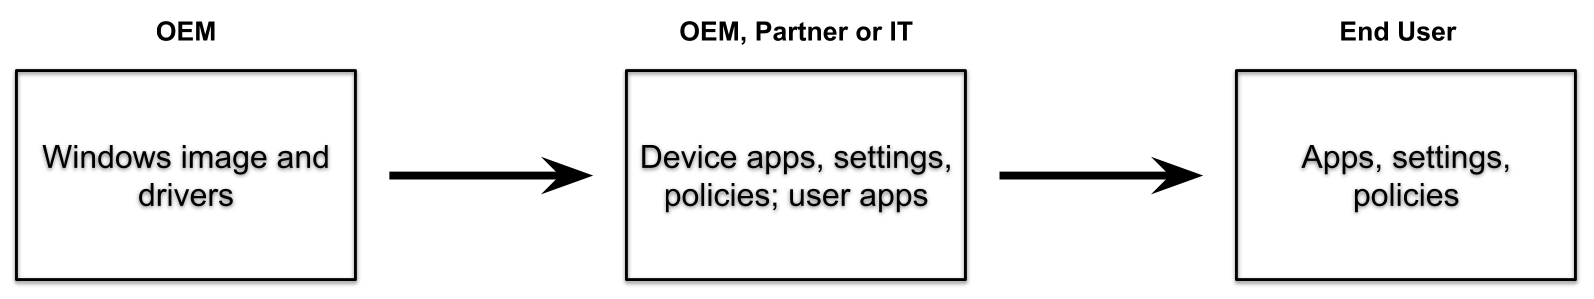 Diagram of the OEM process with partner.